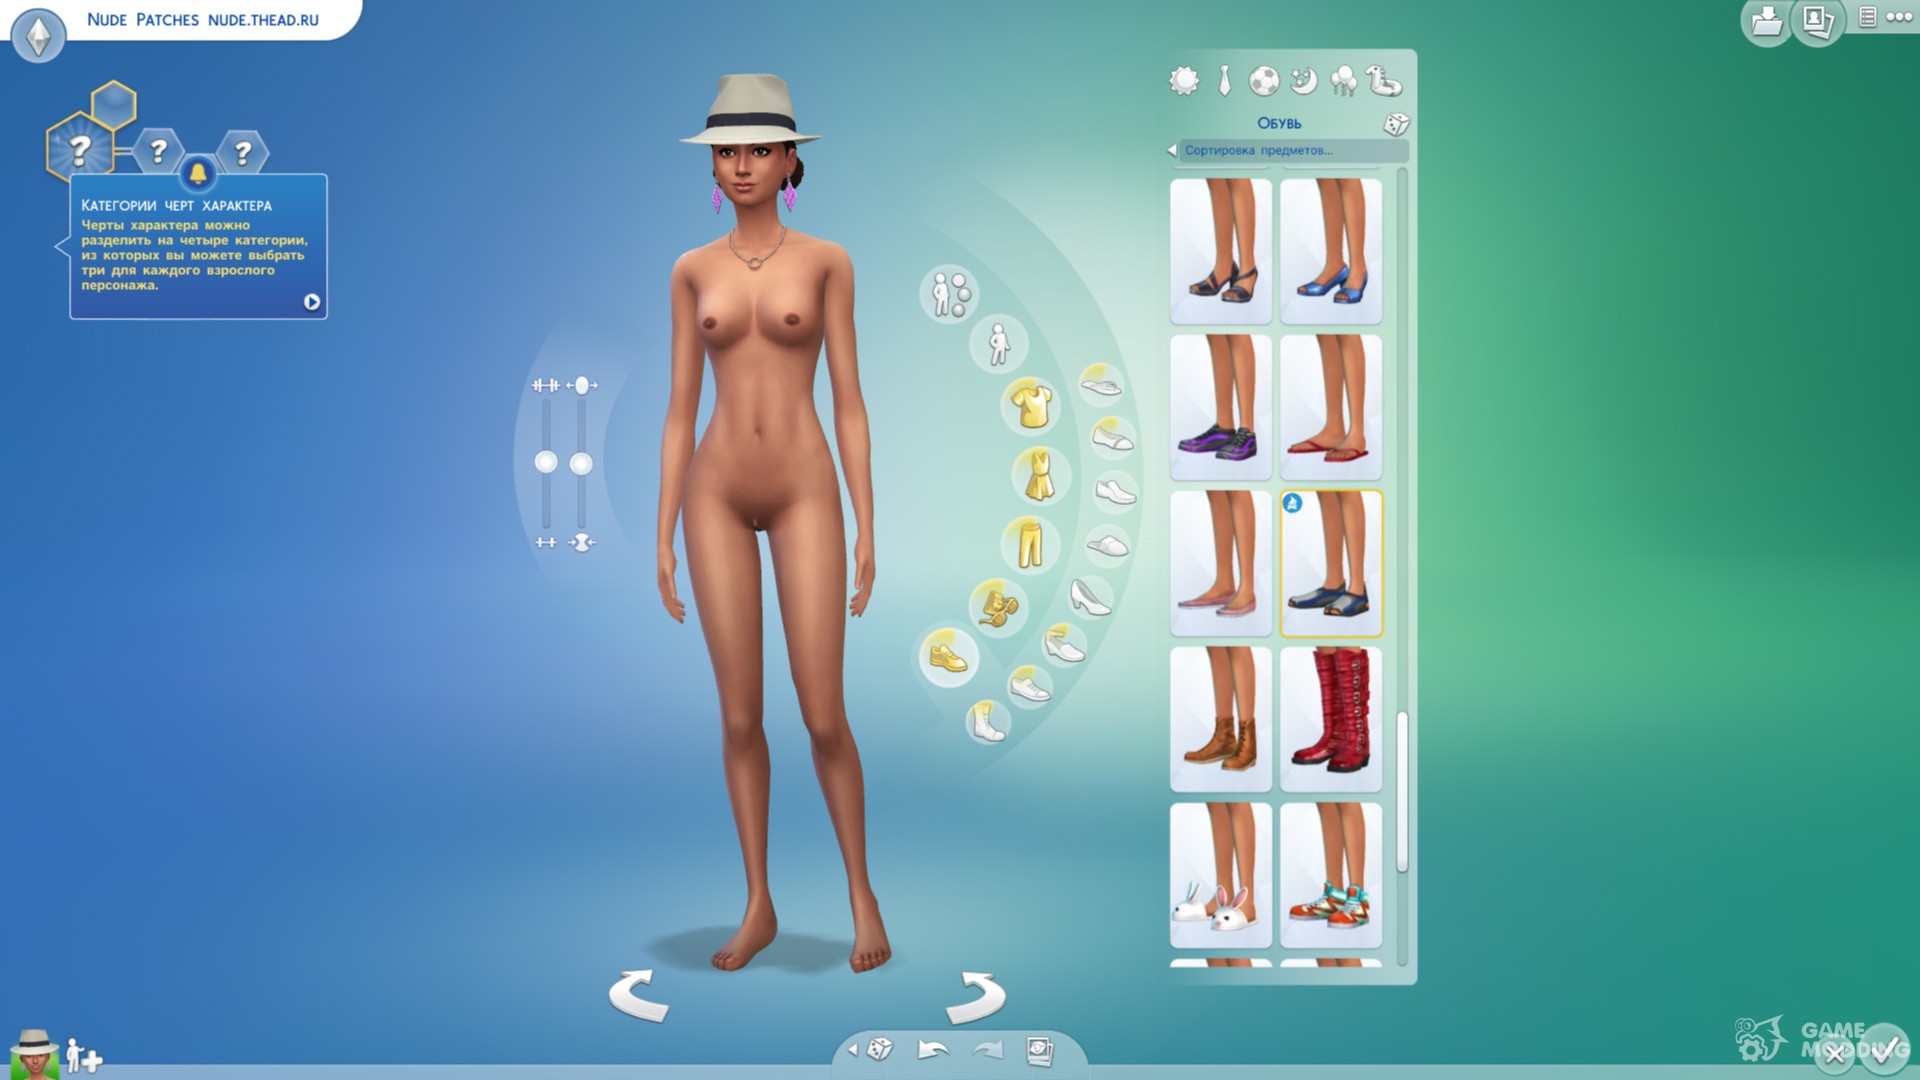 cora hancock recommends The Sims 4 Nude